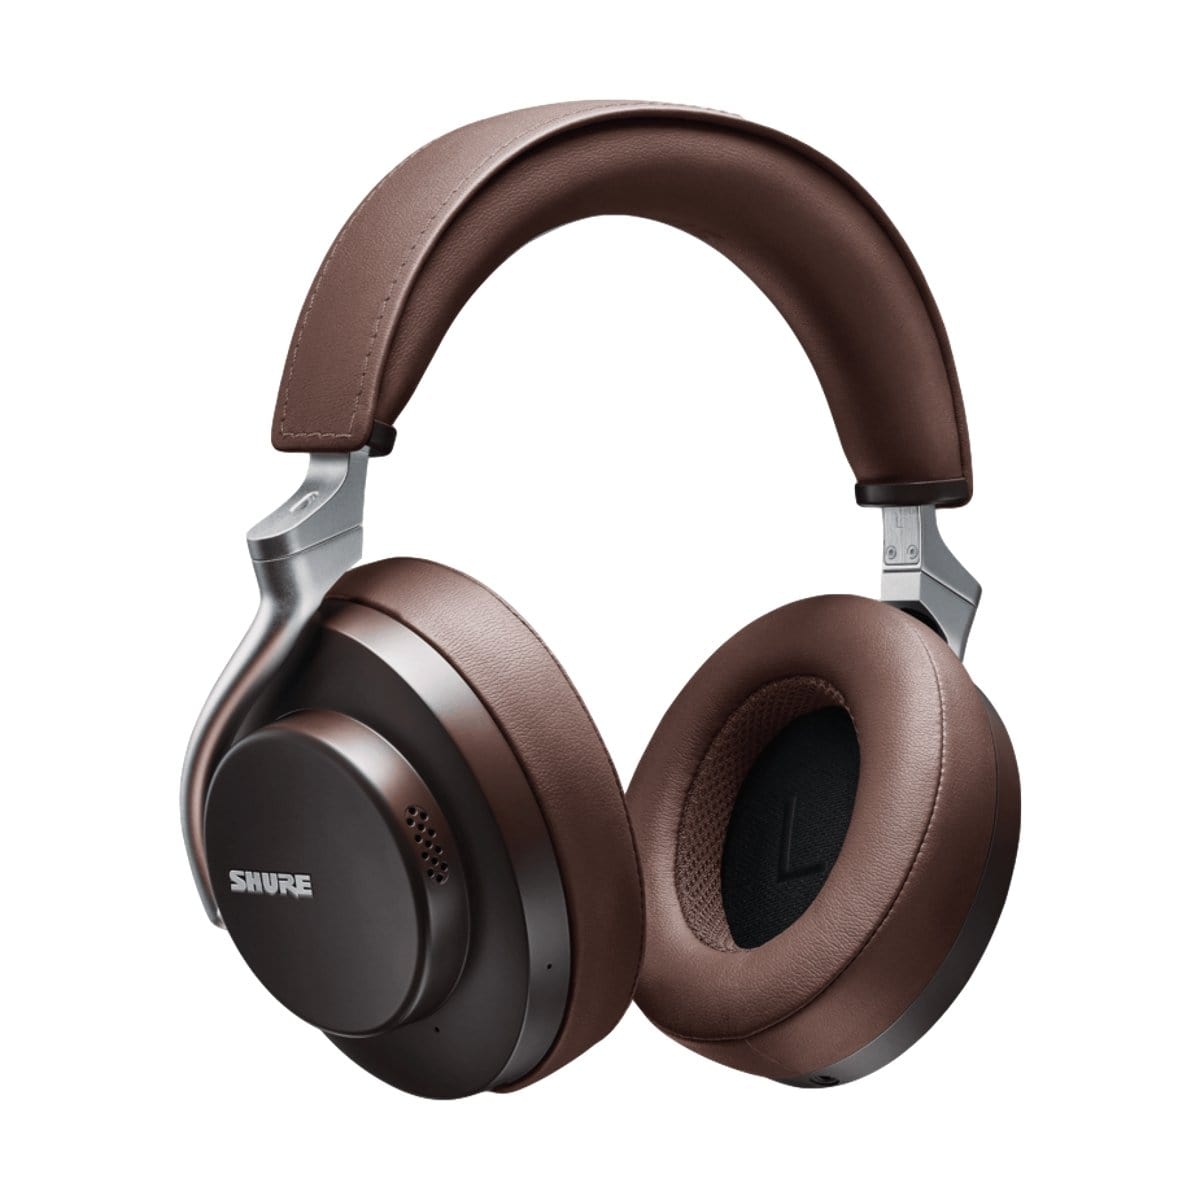 Shure Recording Shure AONIC 50 Wireless Noise Cancelling Headphones Dark Brown - Byron Music